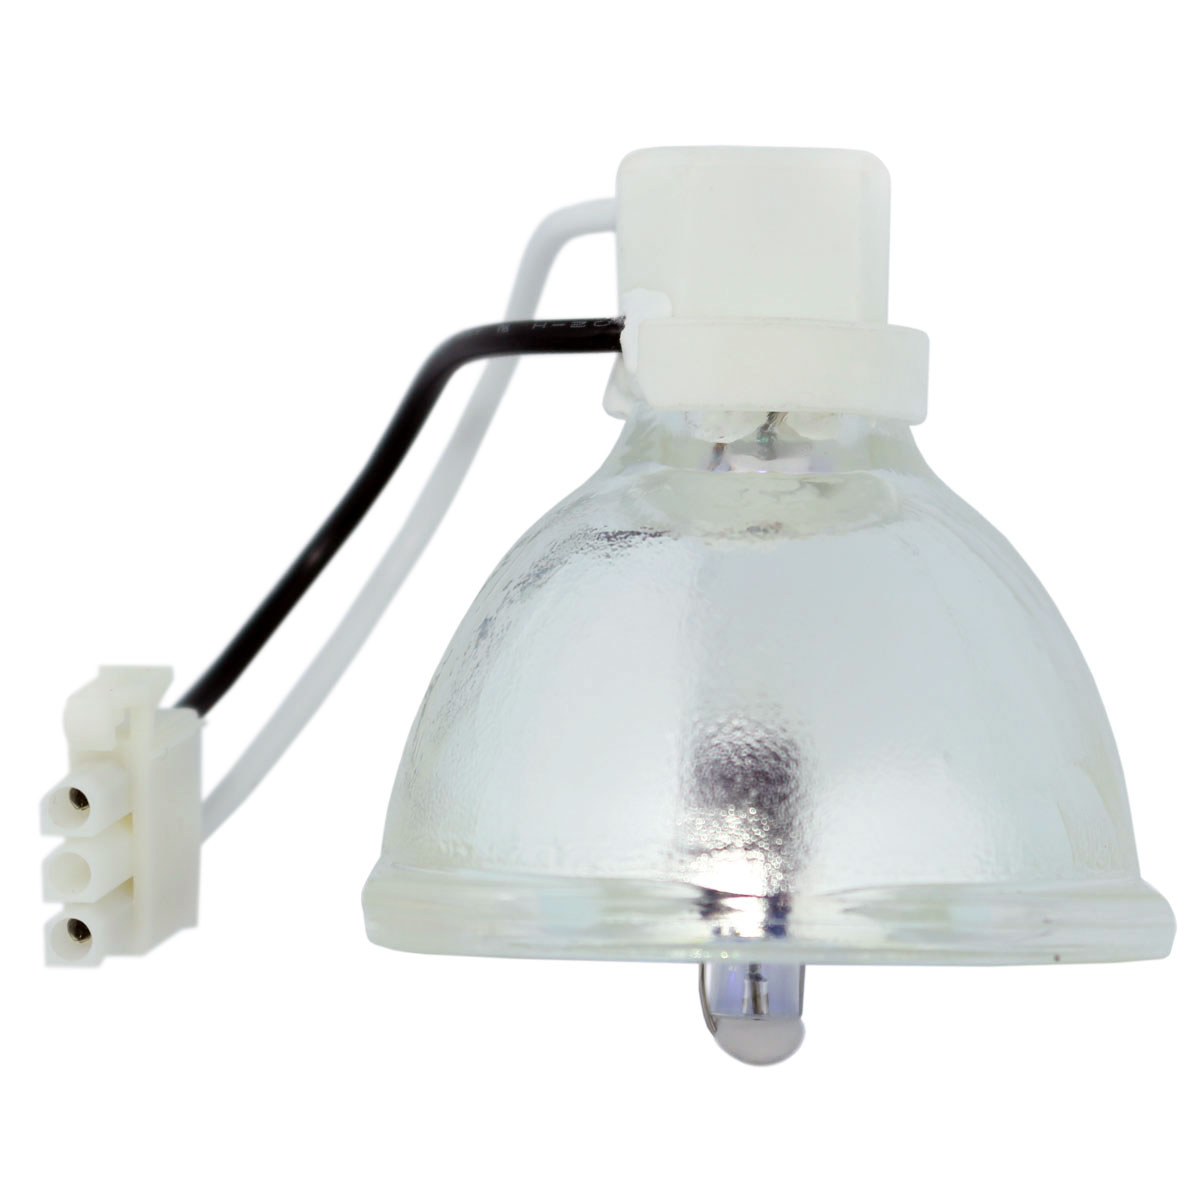 Lutema Economy Bulb for BenQ 5J.J4S05.001 Projector (Lamp Only) - image 4 of 6